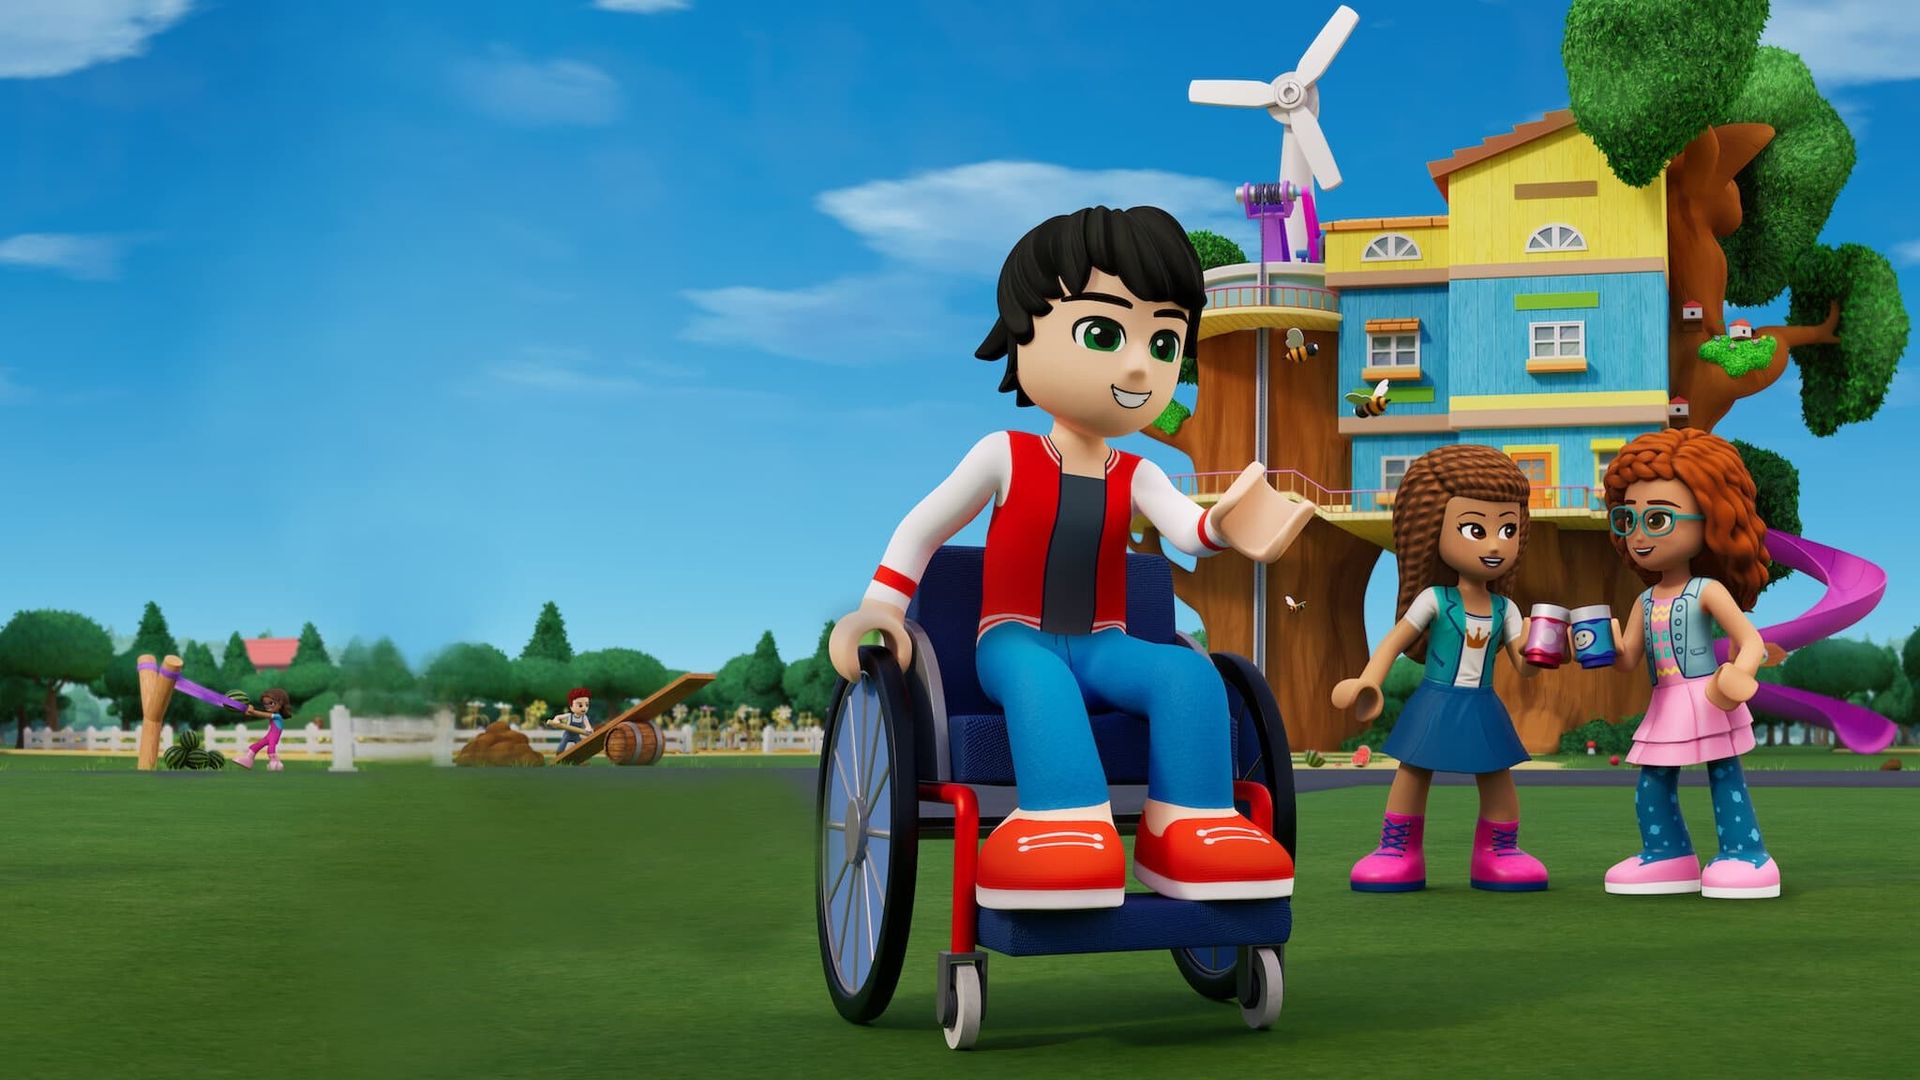 Lego Friends New Show | vlr.eng.br